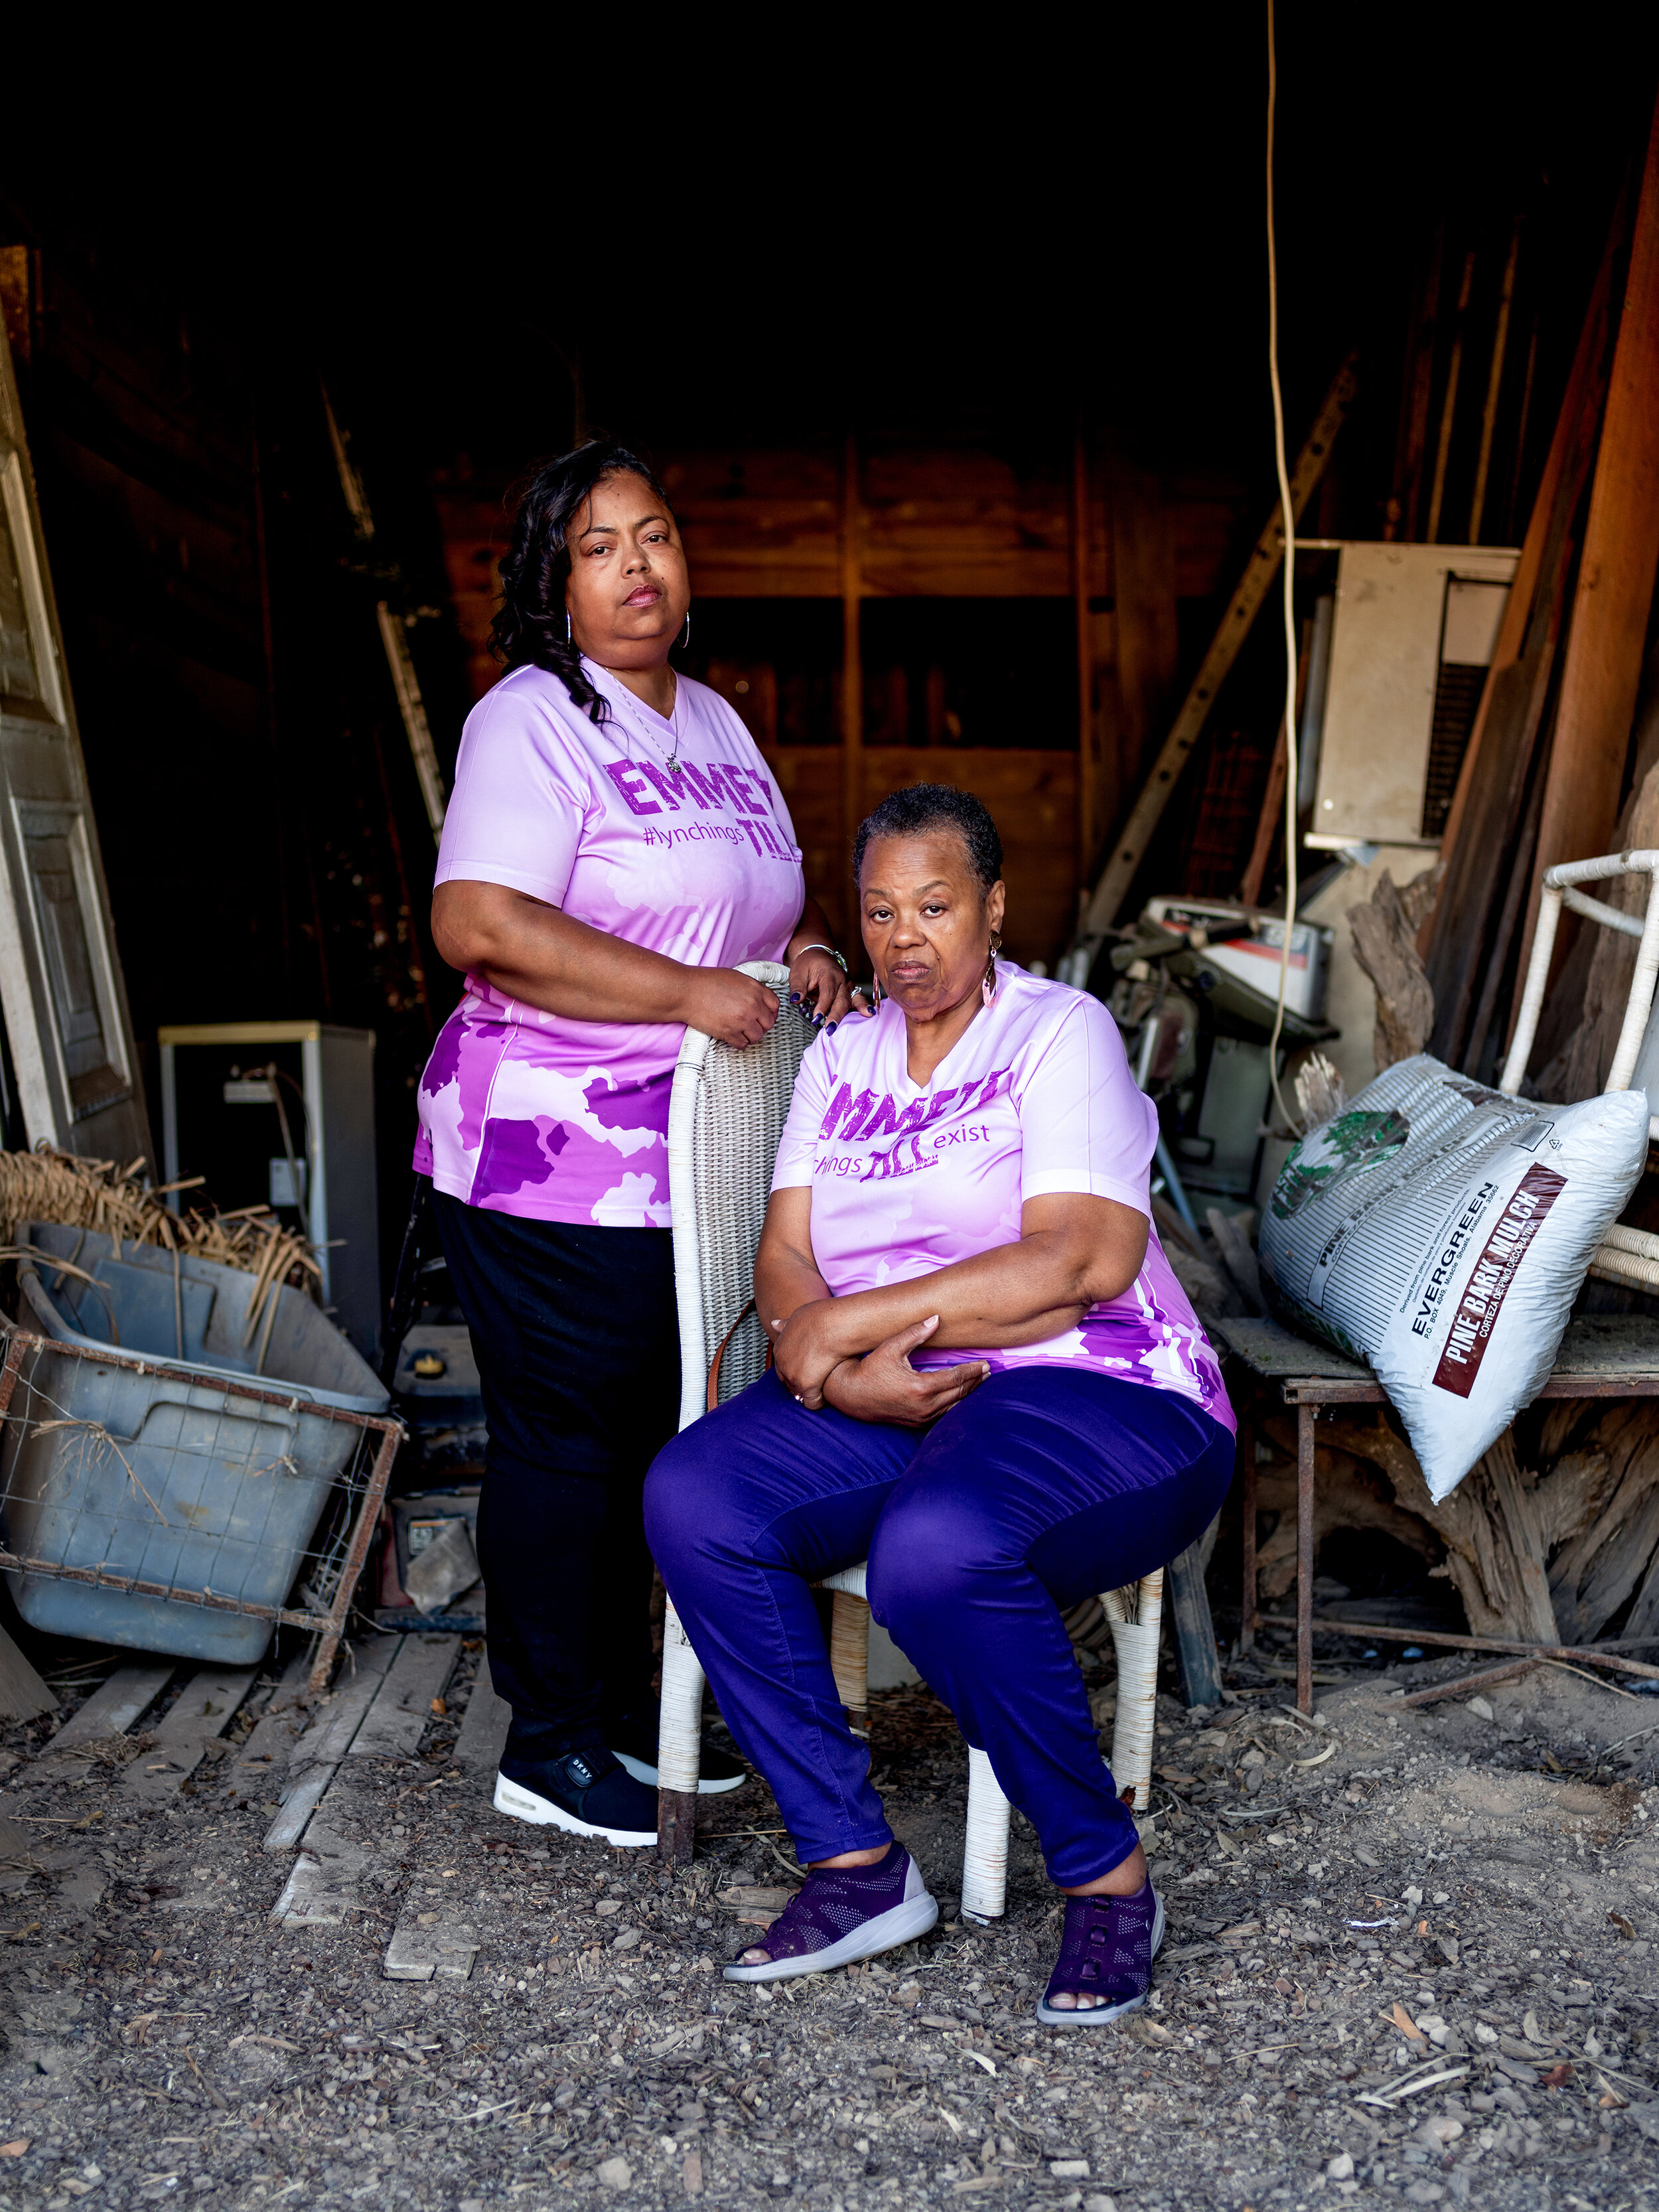  Till’s cousins, Airickca Gordon-Taylor and her mother Ollie at the seed barn where Emmett Till was lynched in 1955. 